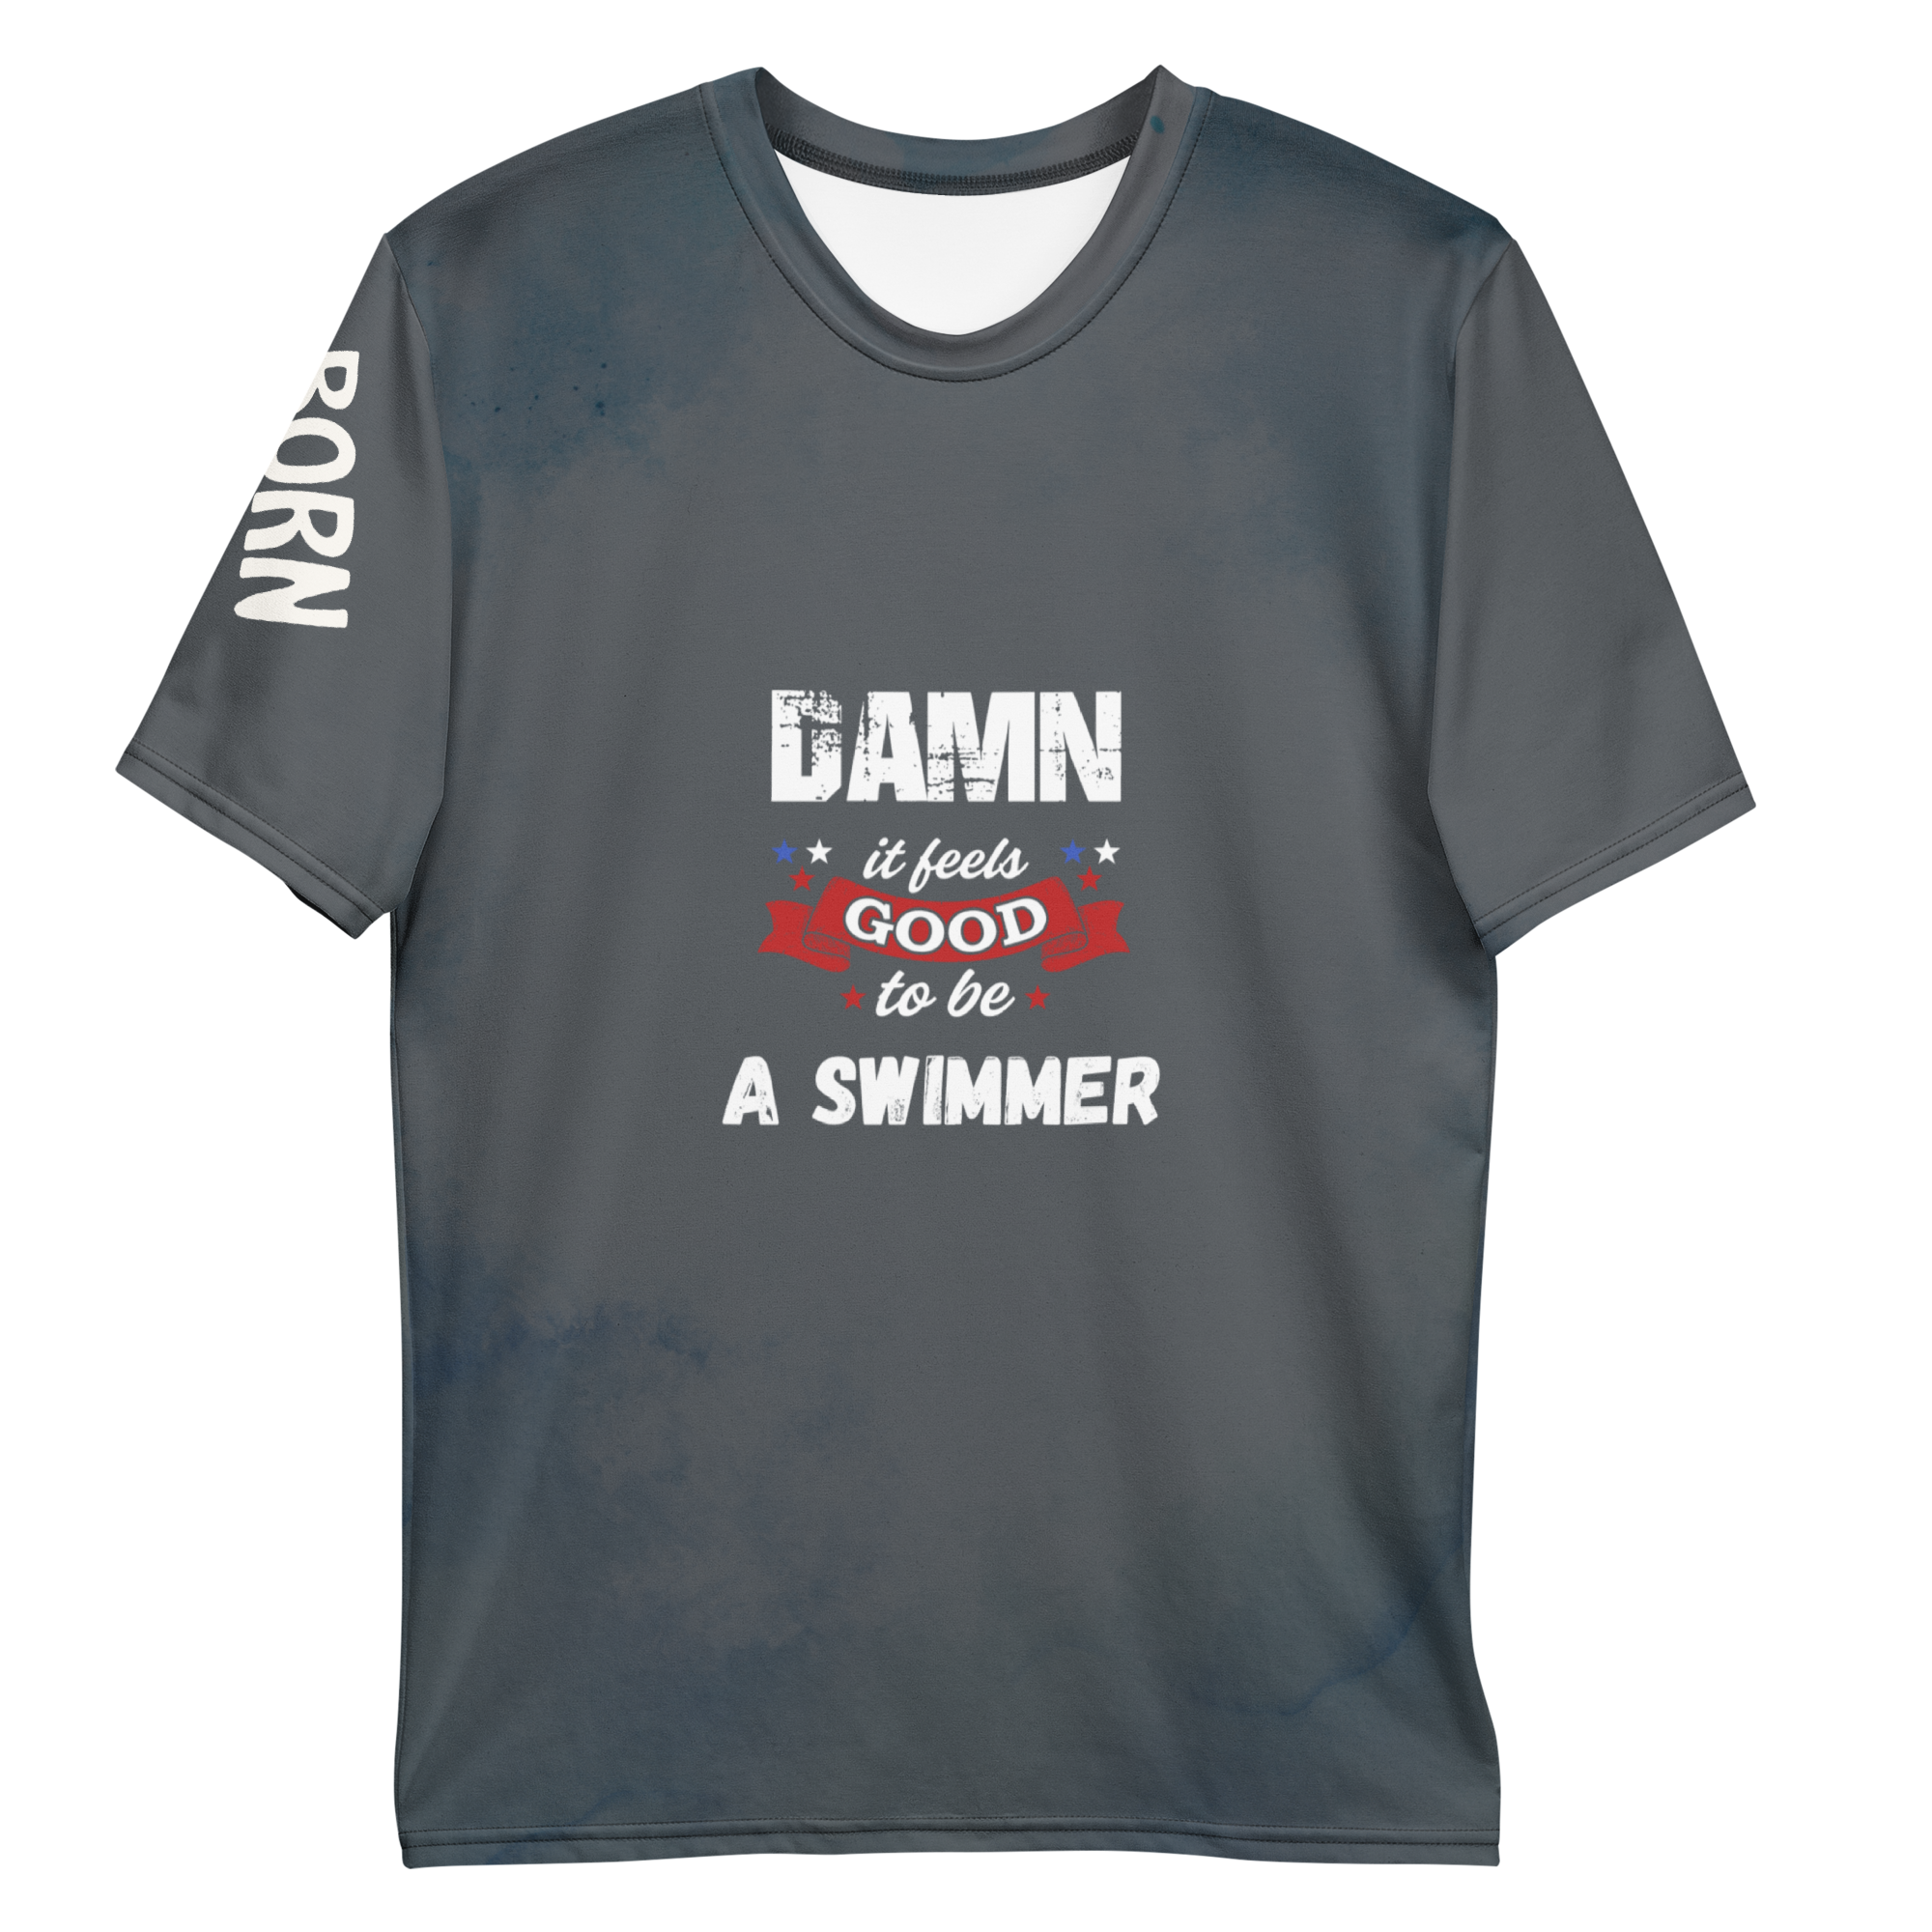 "It feel Good To Be A Swimmer" - Men's t-shirt